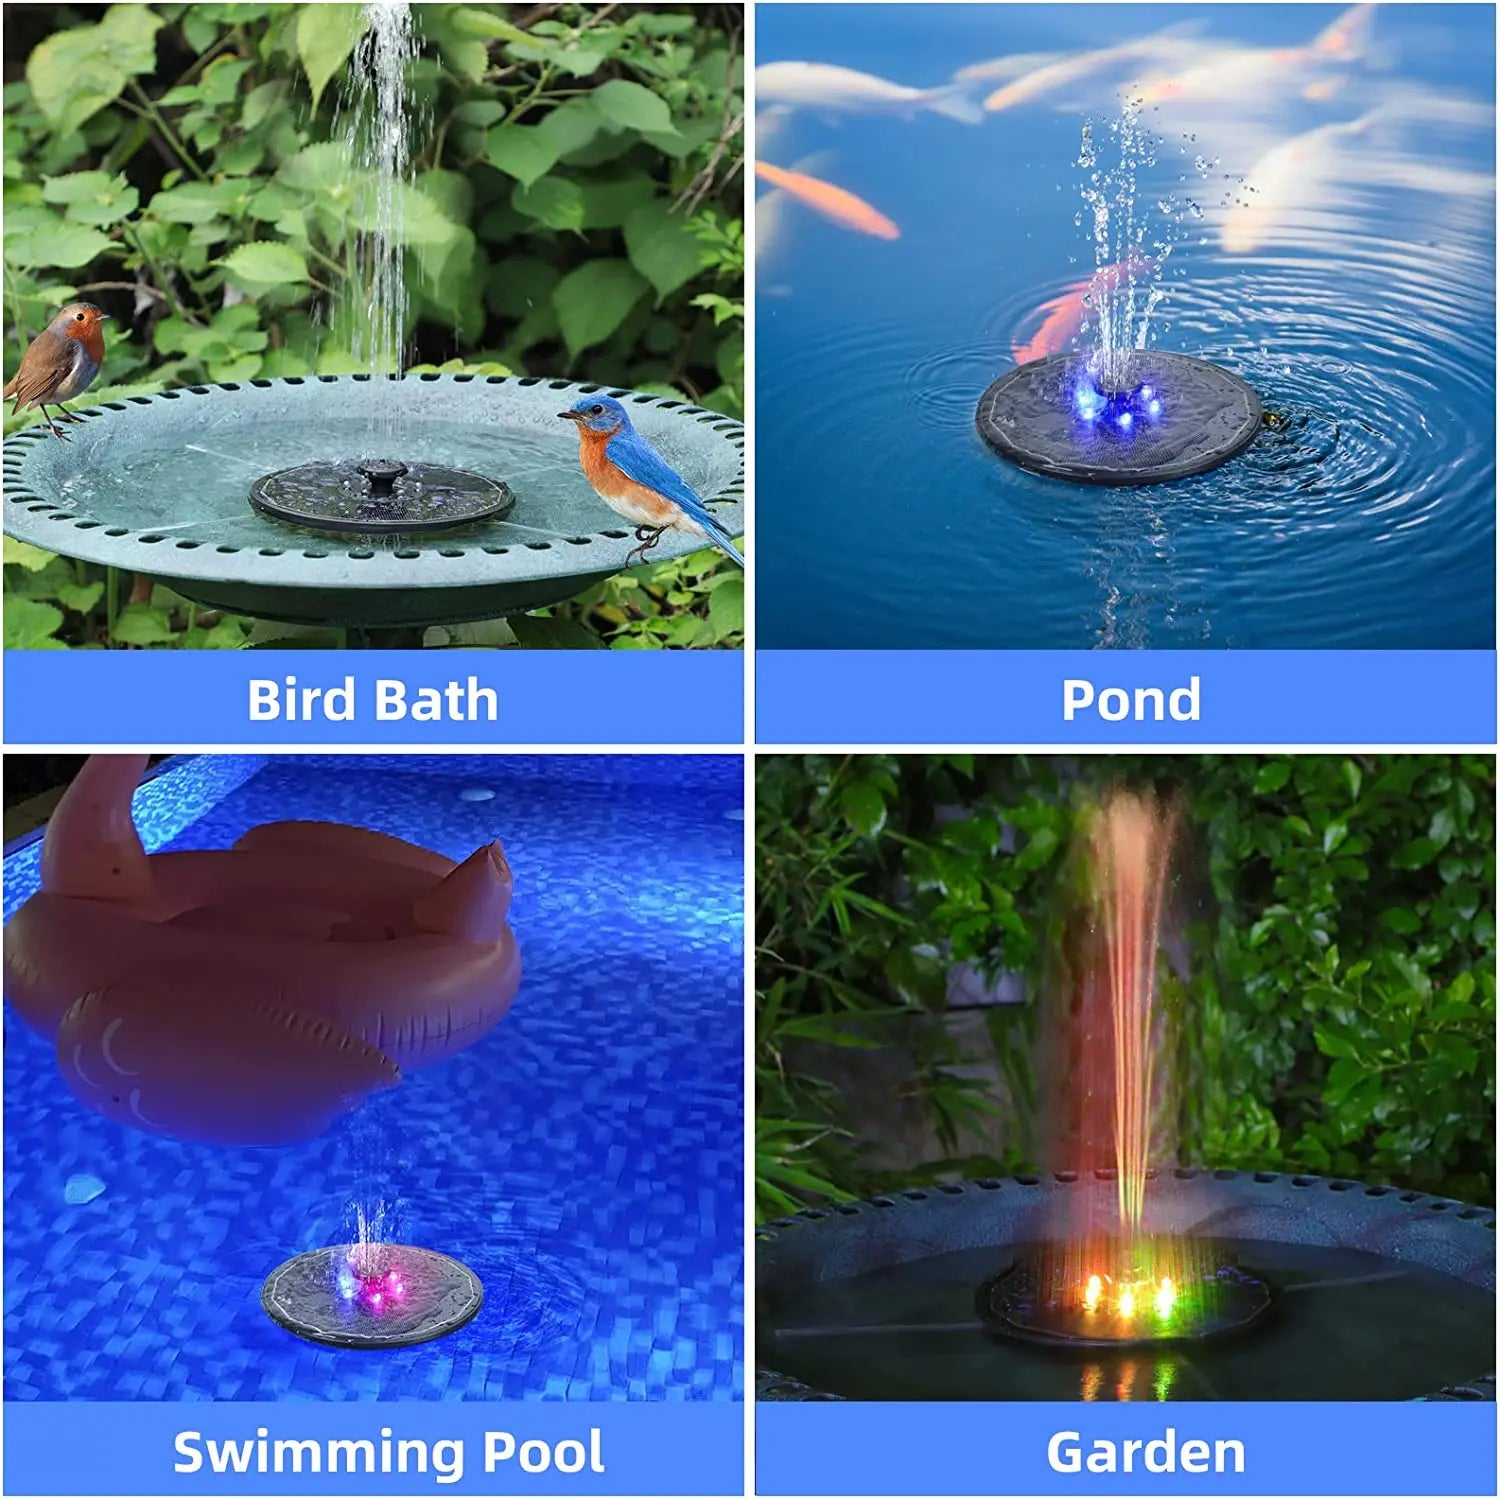 3W Solar Fountain, Add color and movement to your garden pond with this solar-powered fountain